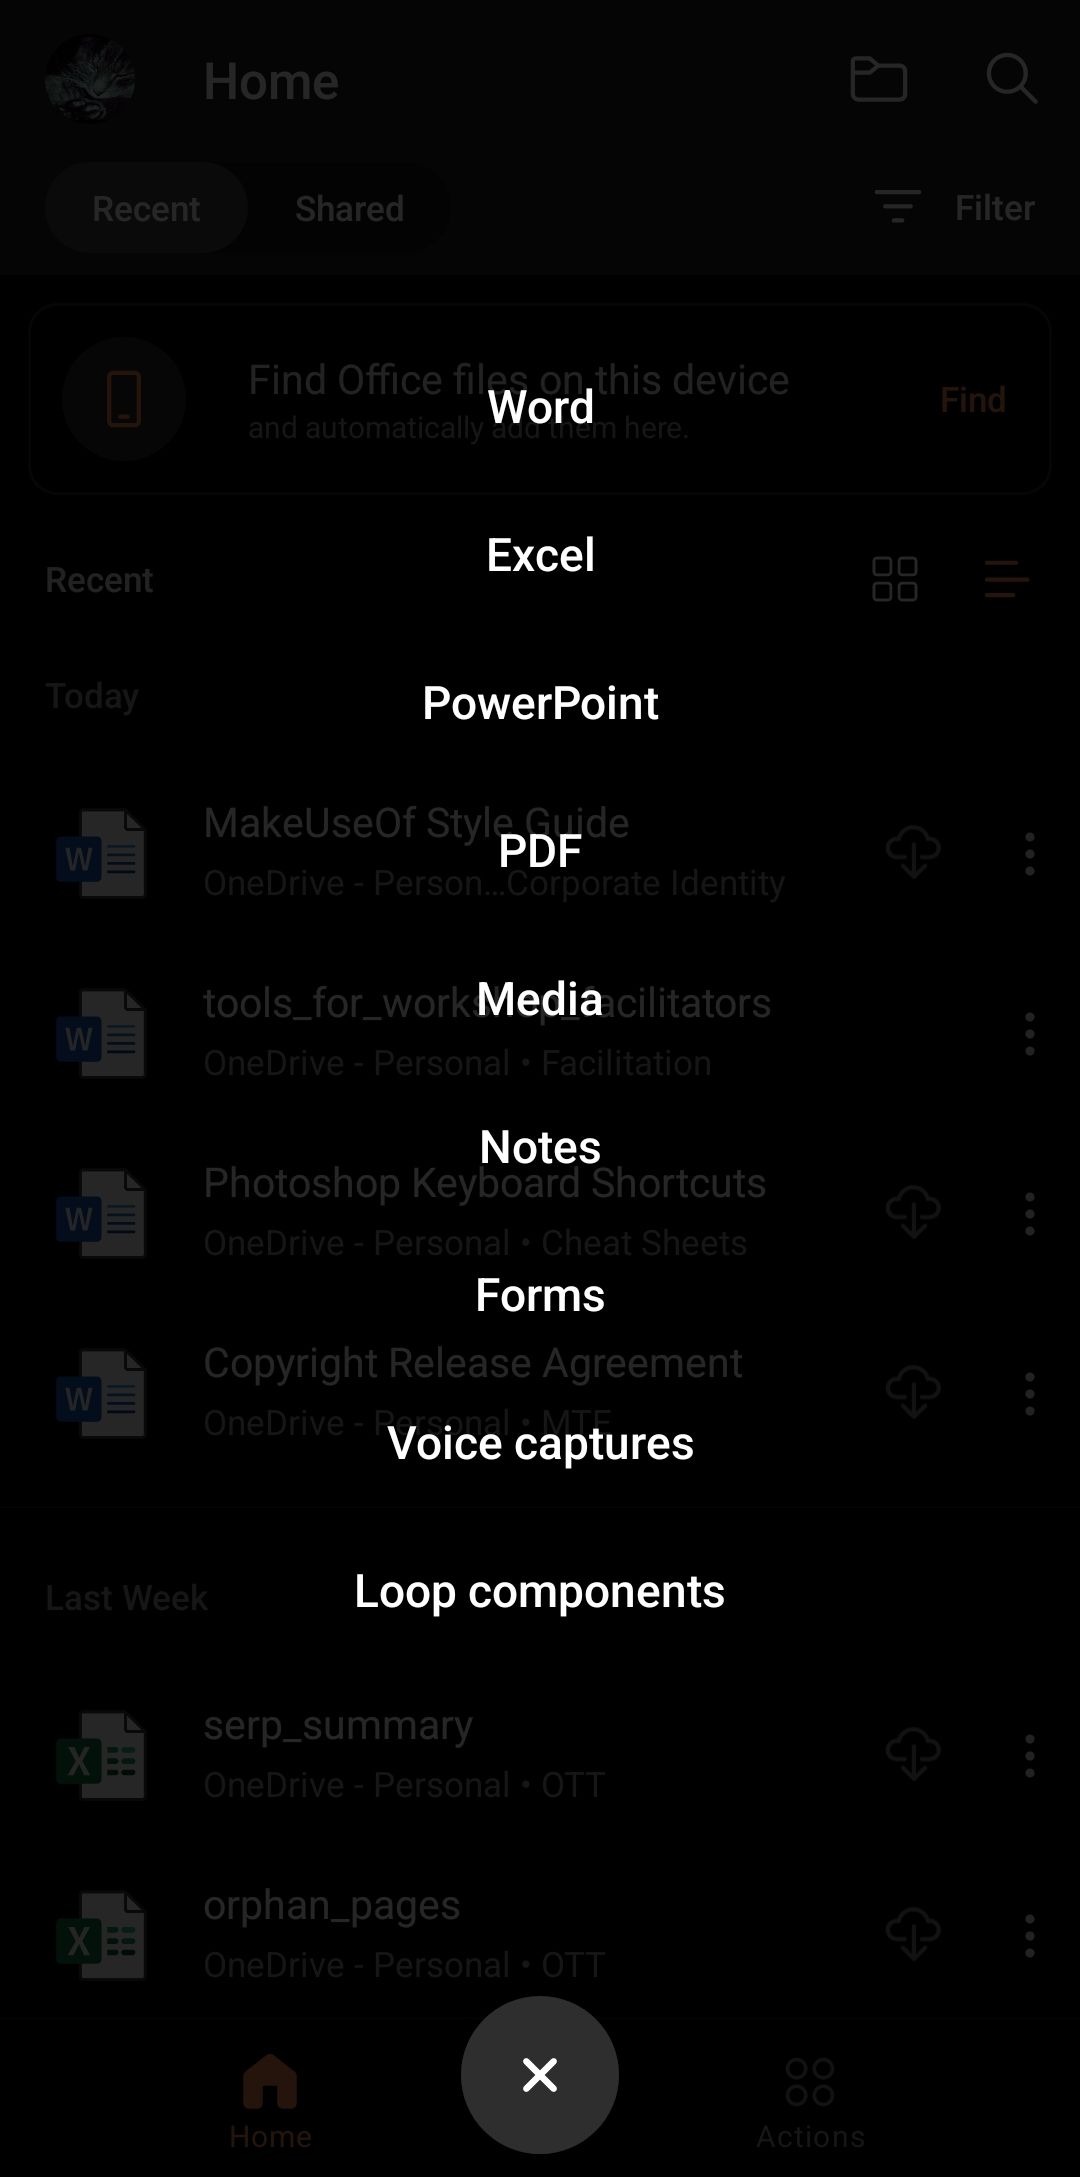 Microsoft-Office-Edit-and-Share-on-Android--Filter-Screen-2